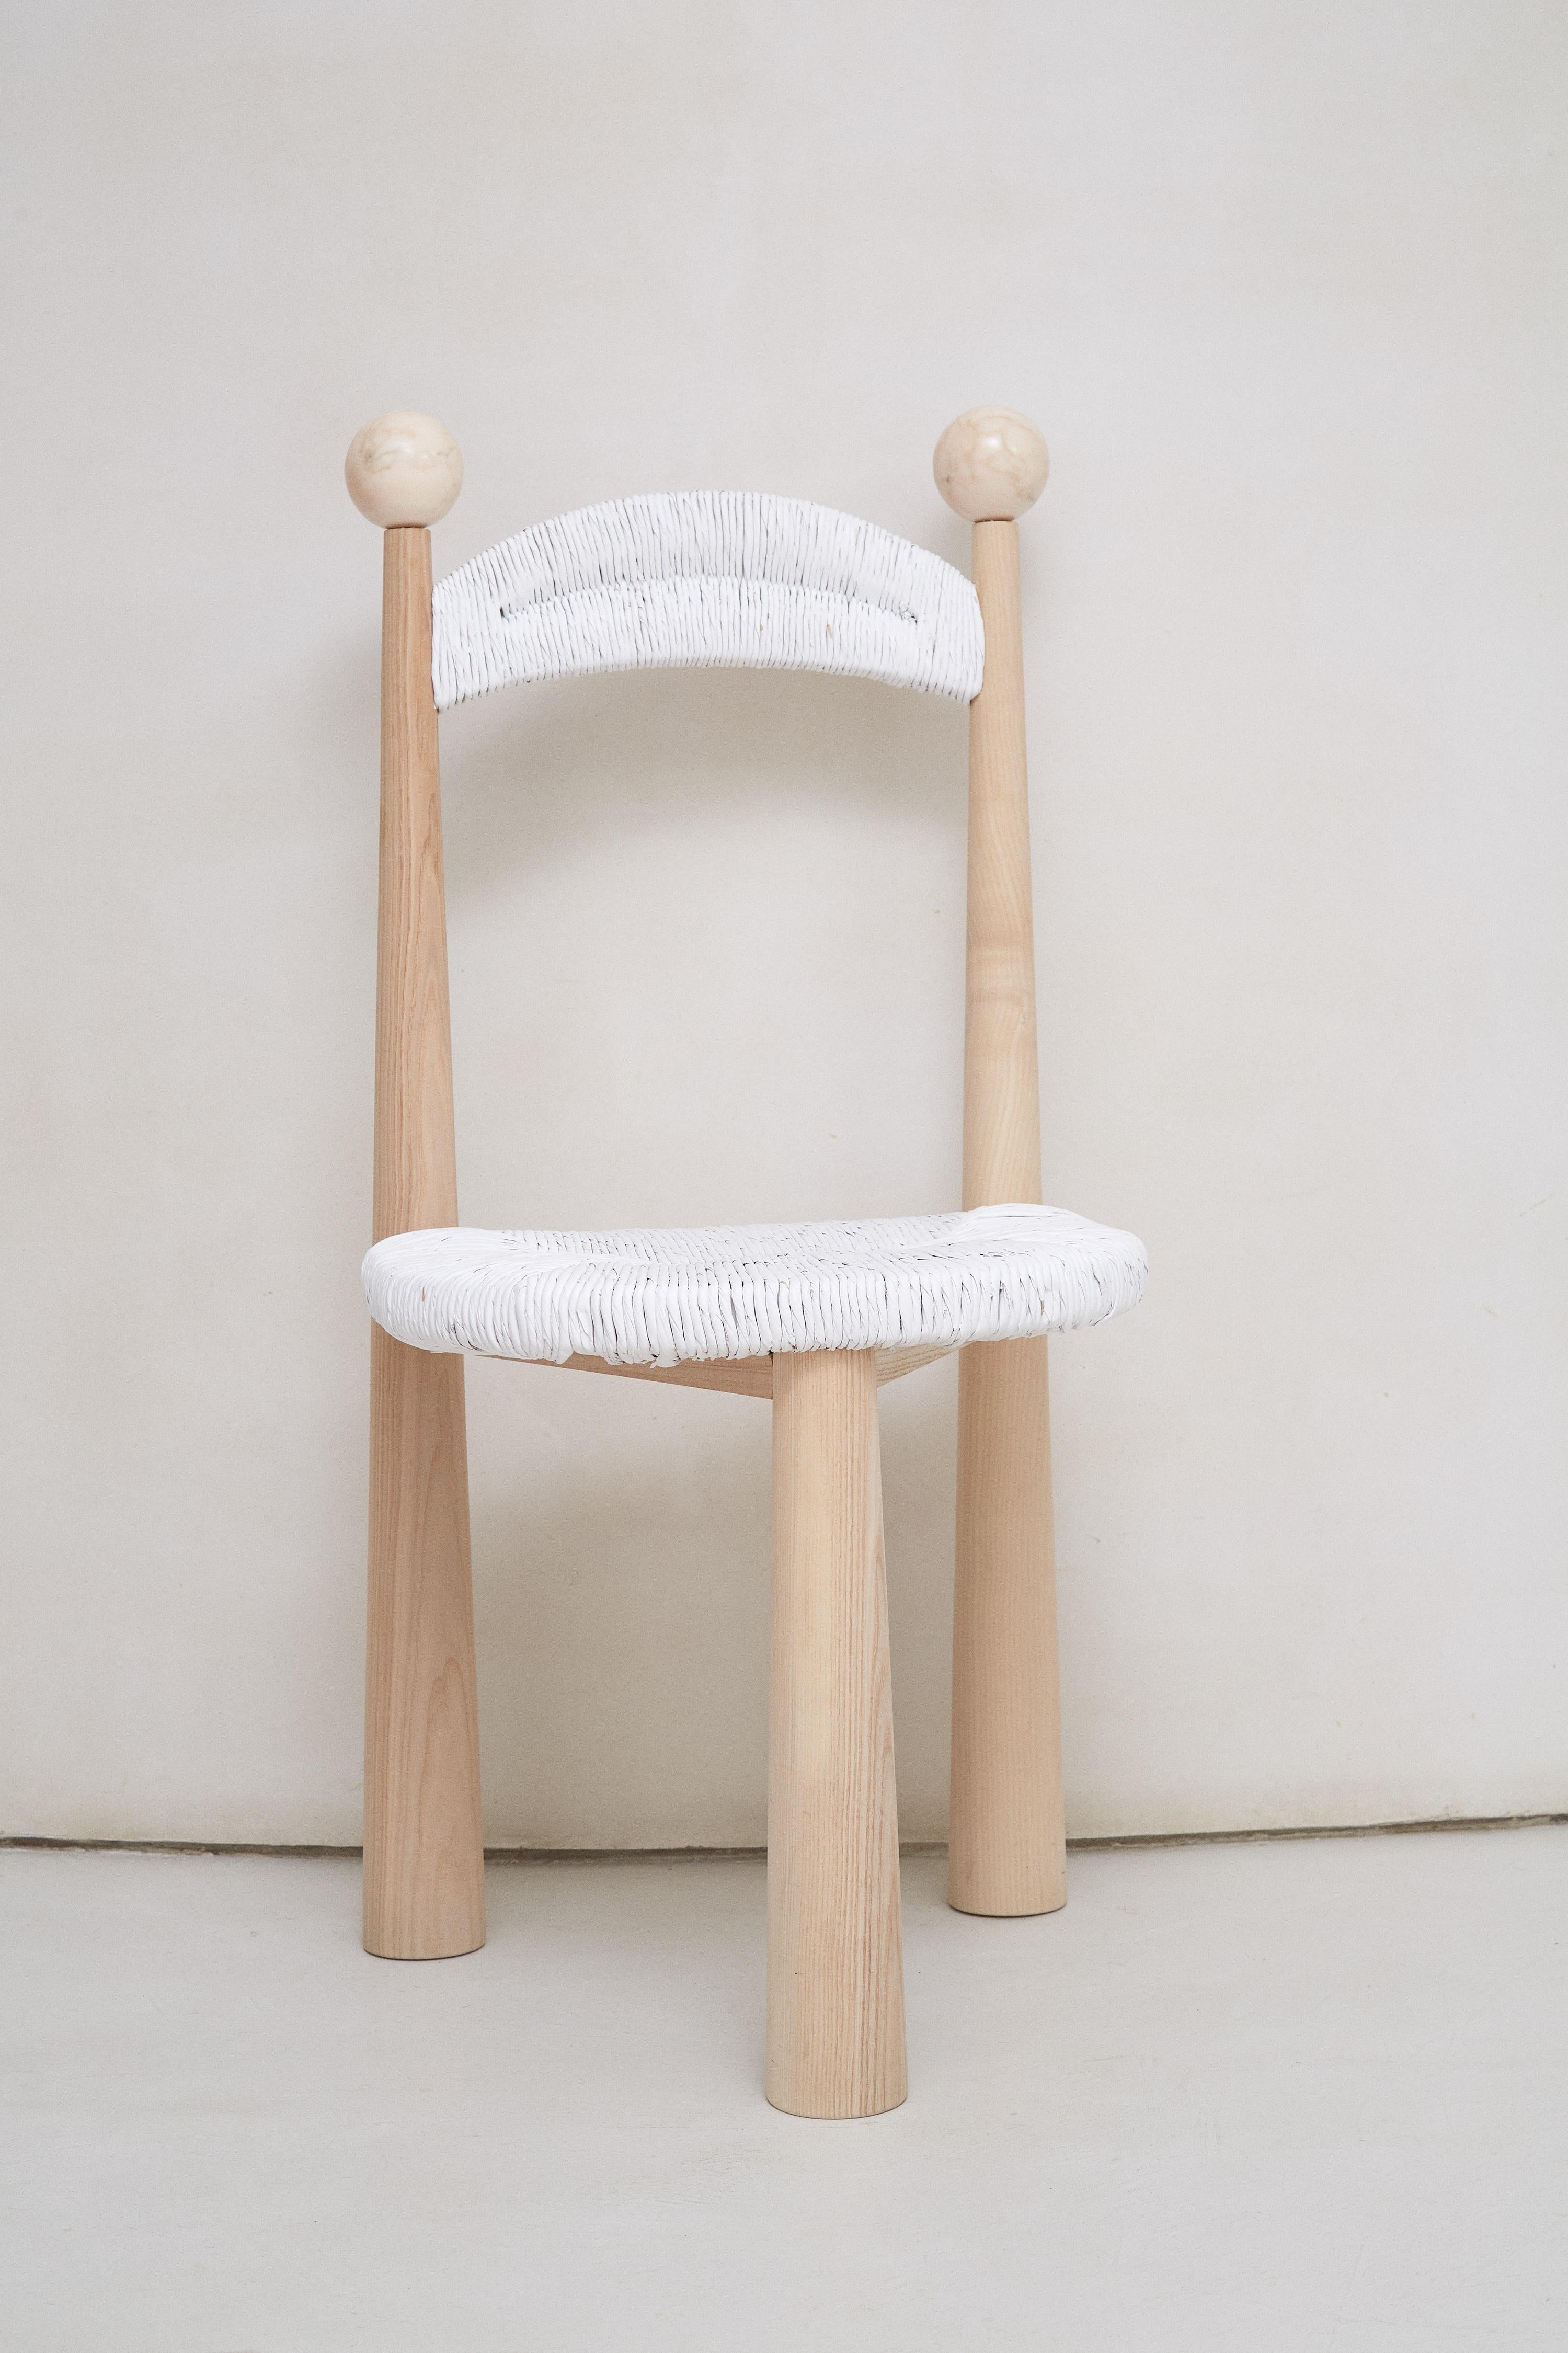 Newcastle Chair by Patricia Bustos de la Torre
Dimensions: D 47 x W 48 x H 91 cm.
Materials: Wood and plush.

Newcastle Chair is a three-legged wooden chair with a rattan seat capable of transforming any dining room. This perfect balance between